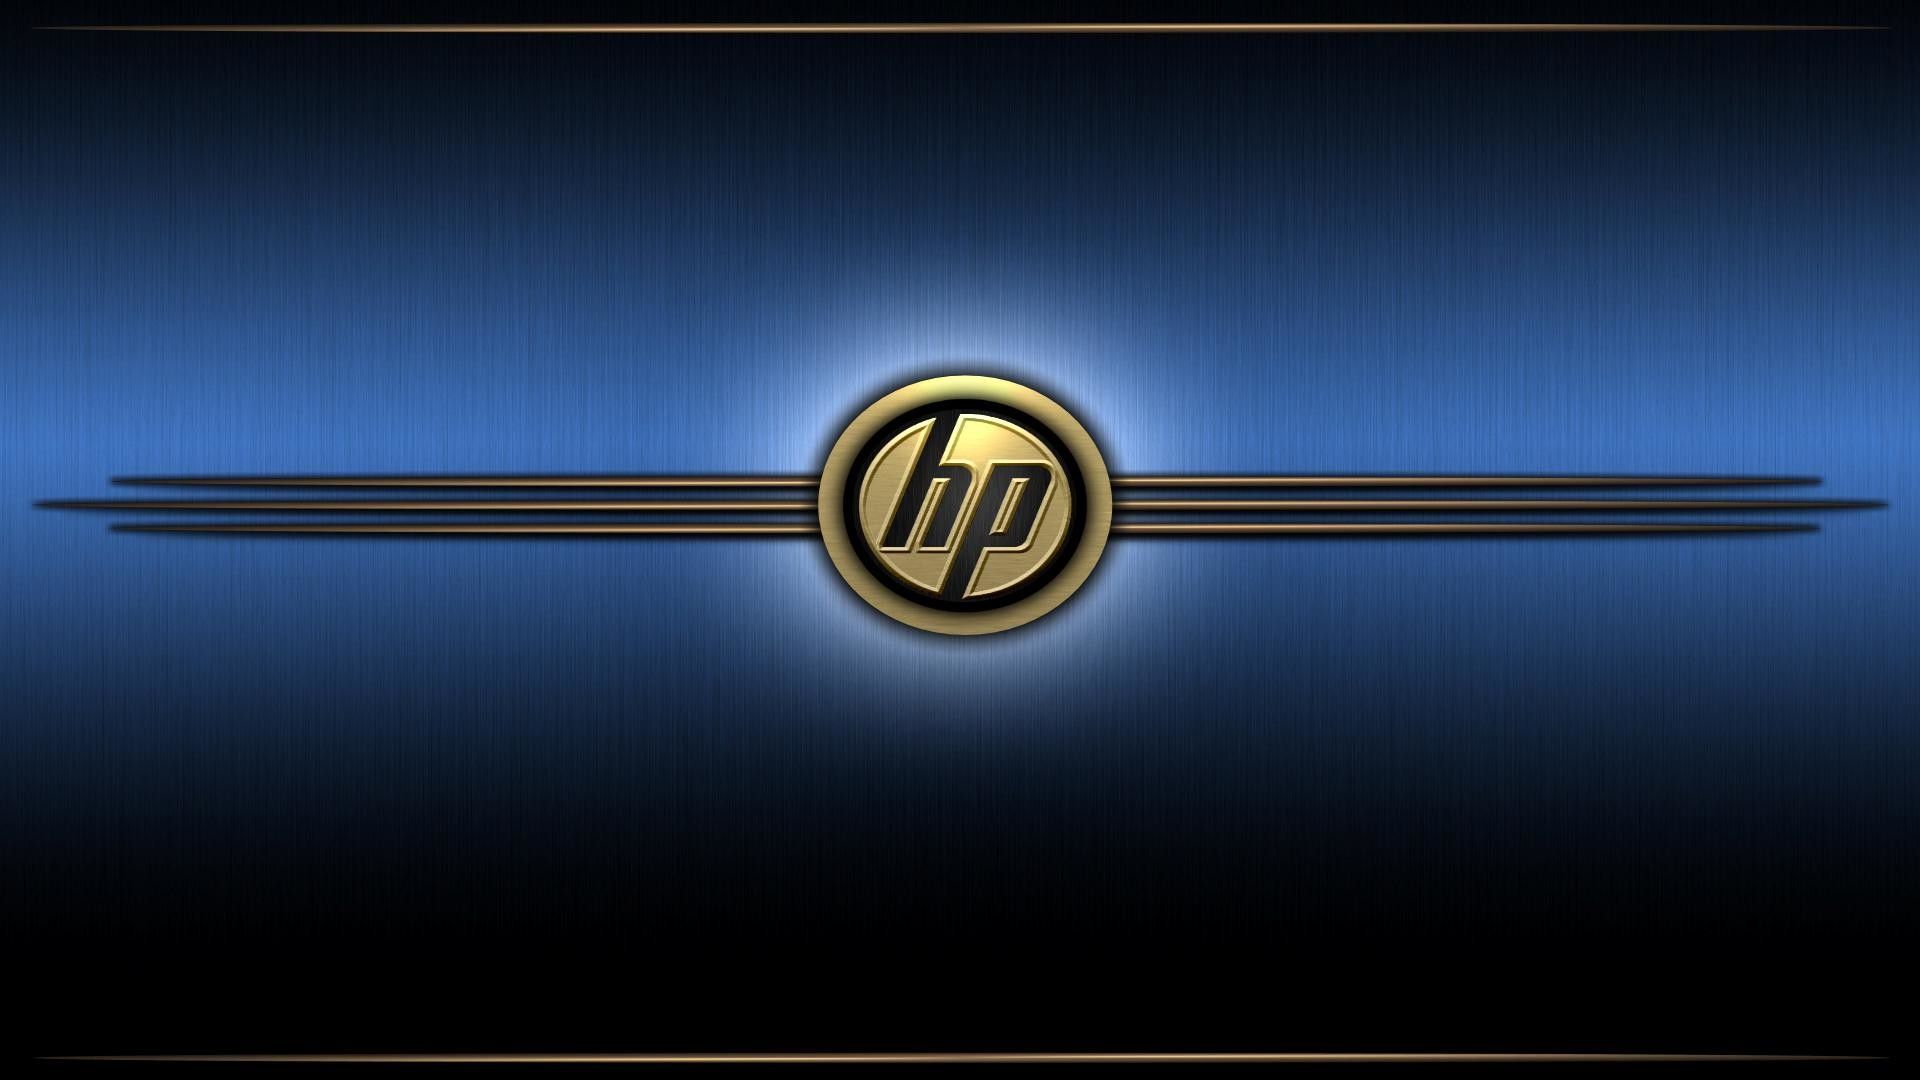 X hp desktop background images android wallpaper abstract blue wallpapers hp logo